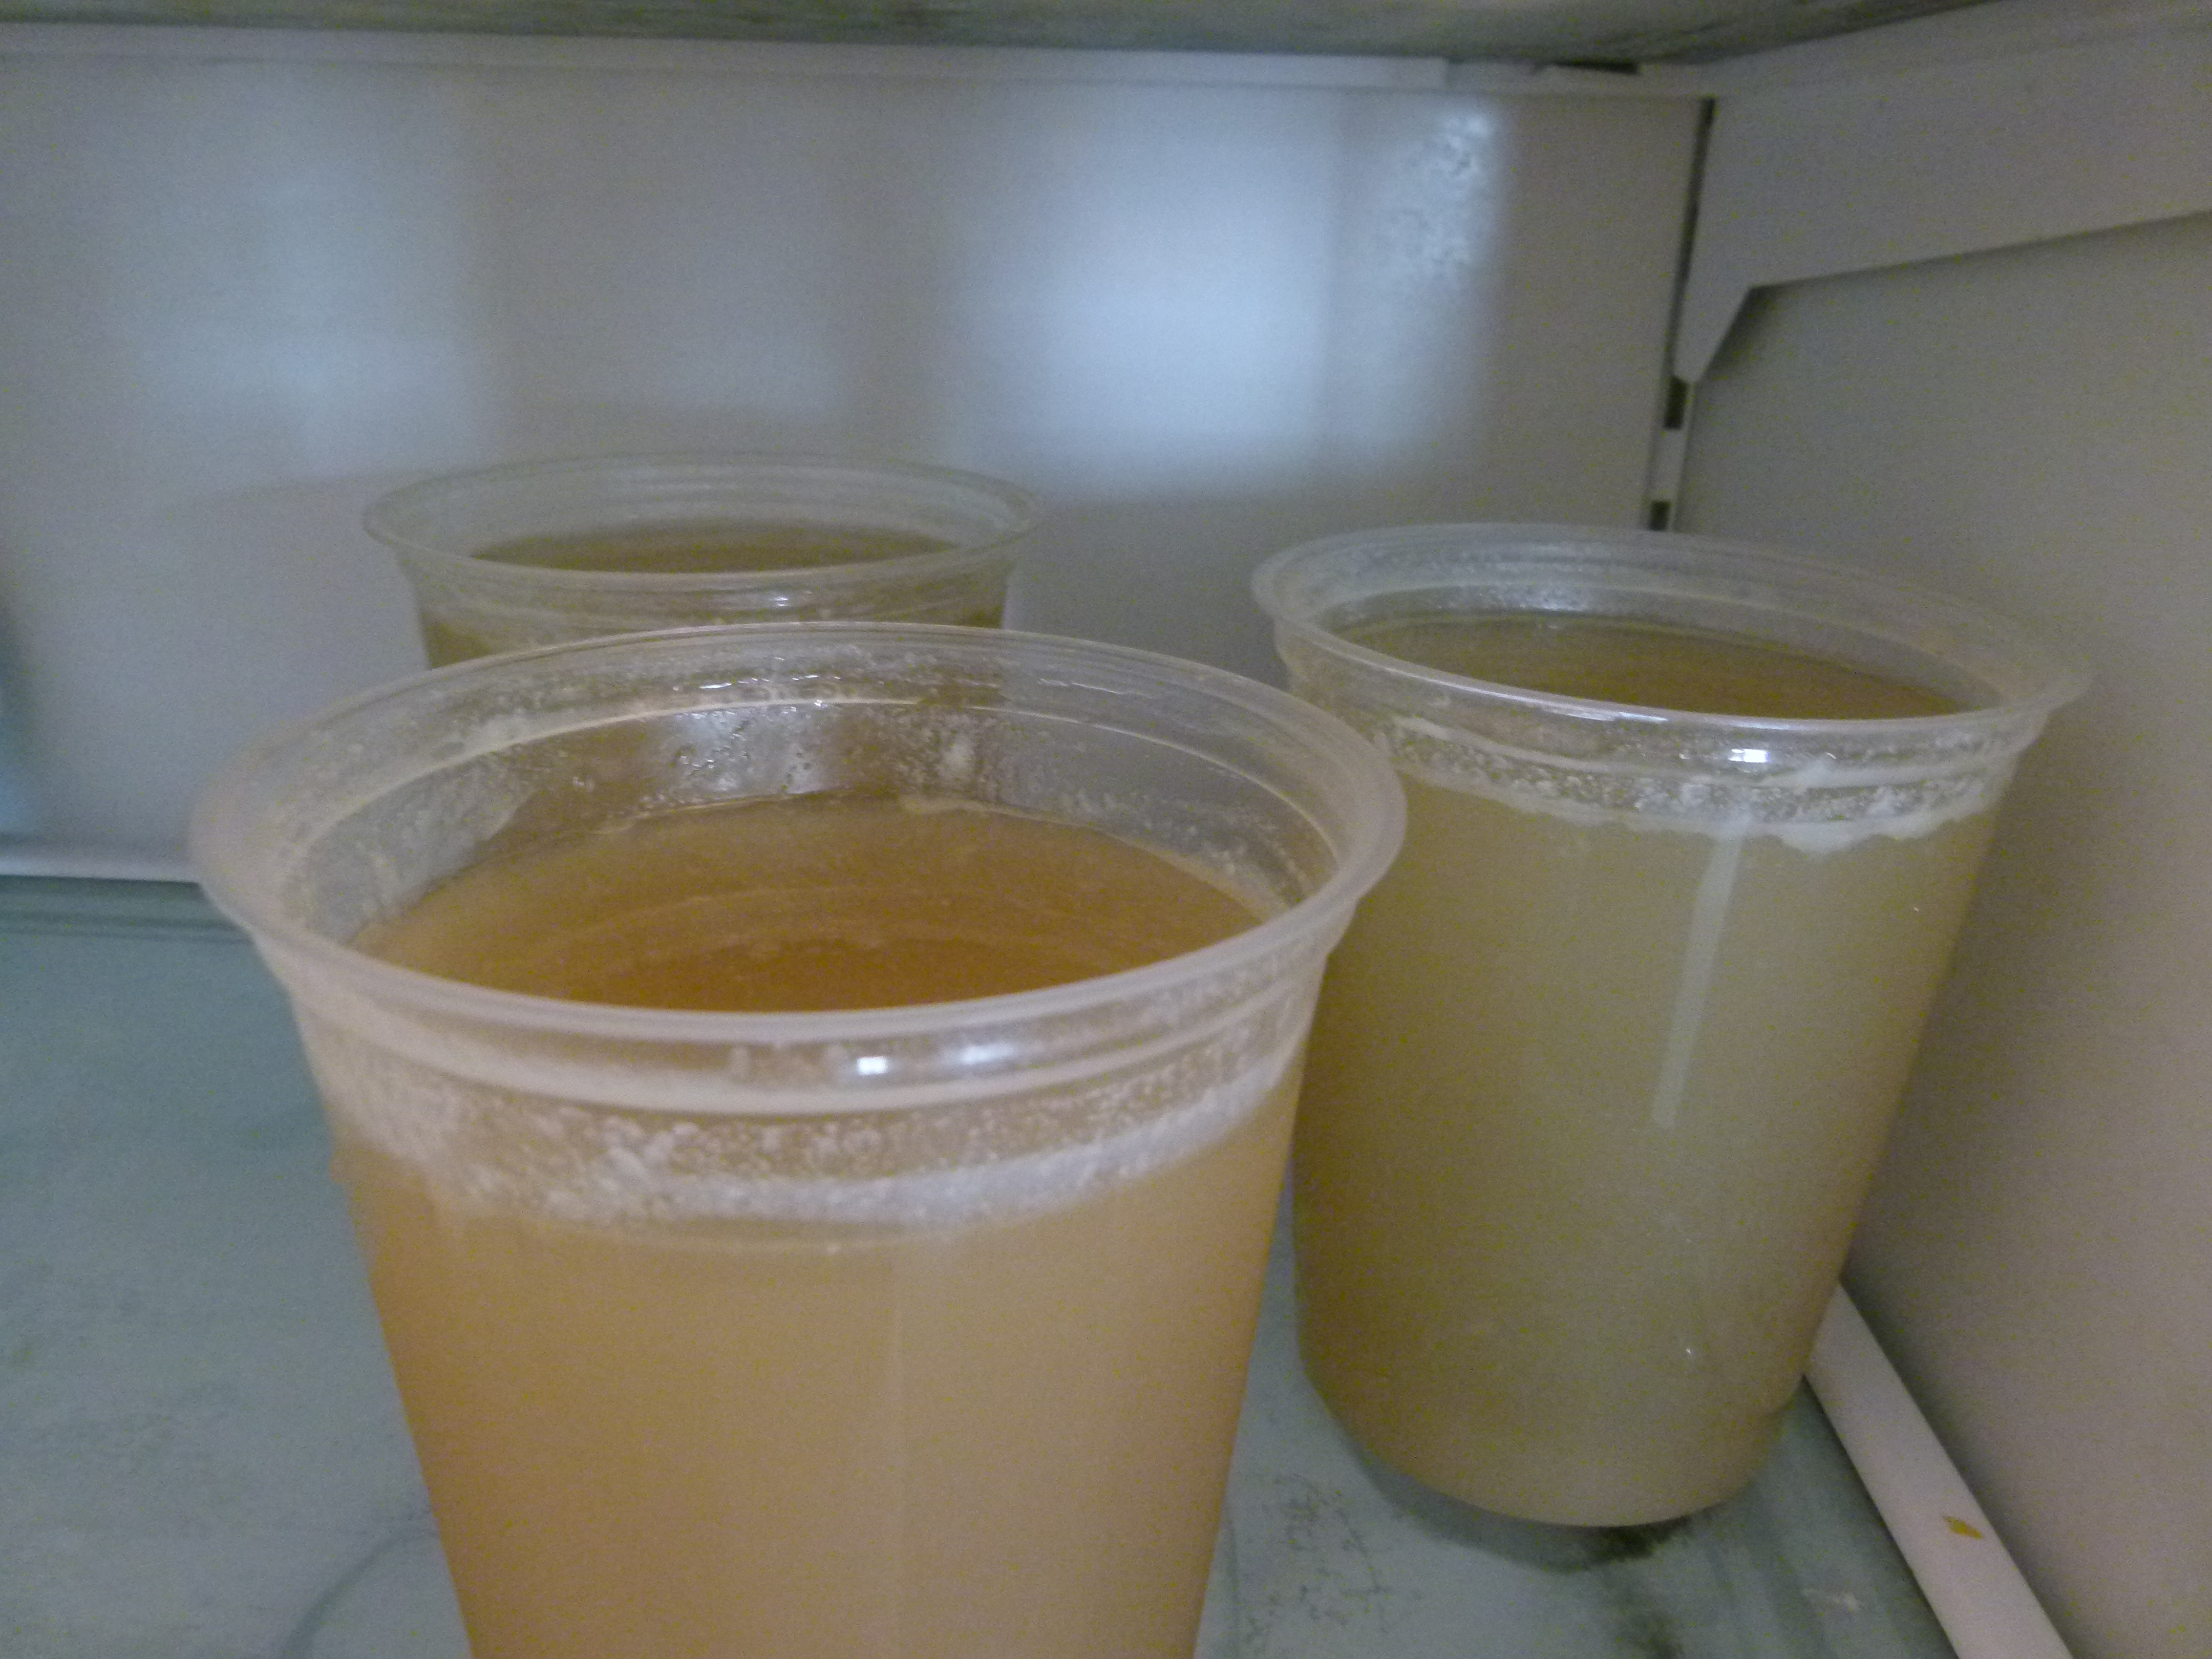 Freezing Chicken Broth - Can You Freeze Chicken Broth?